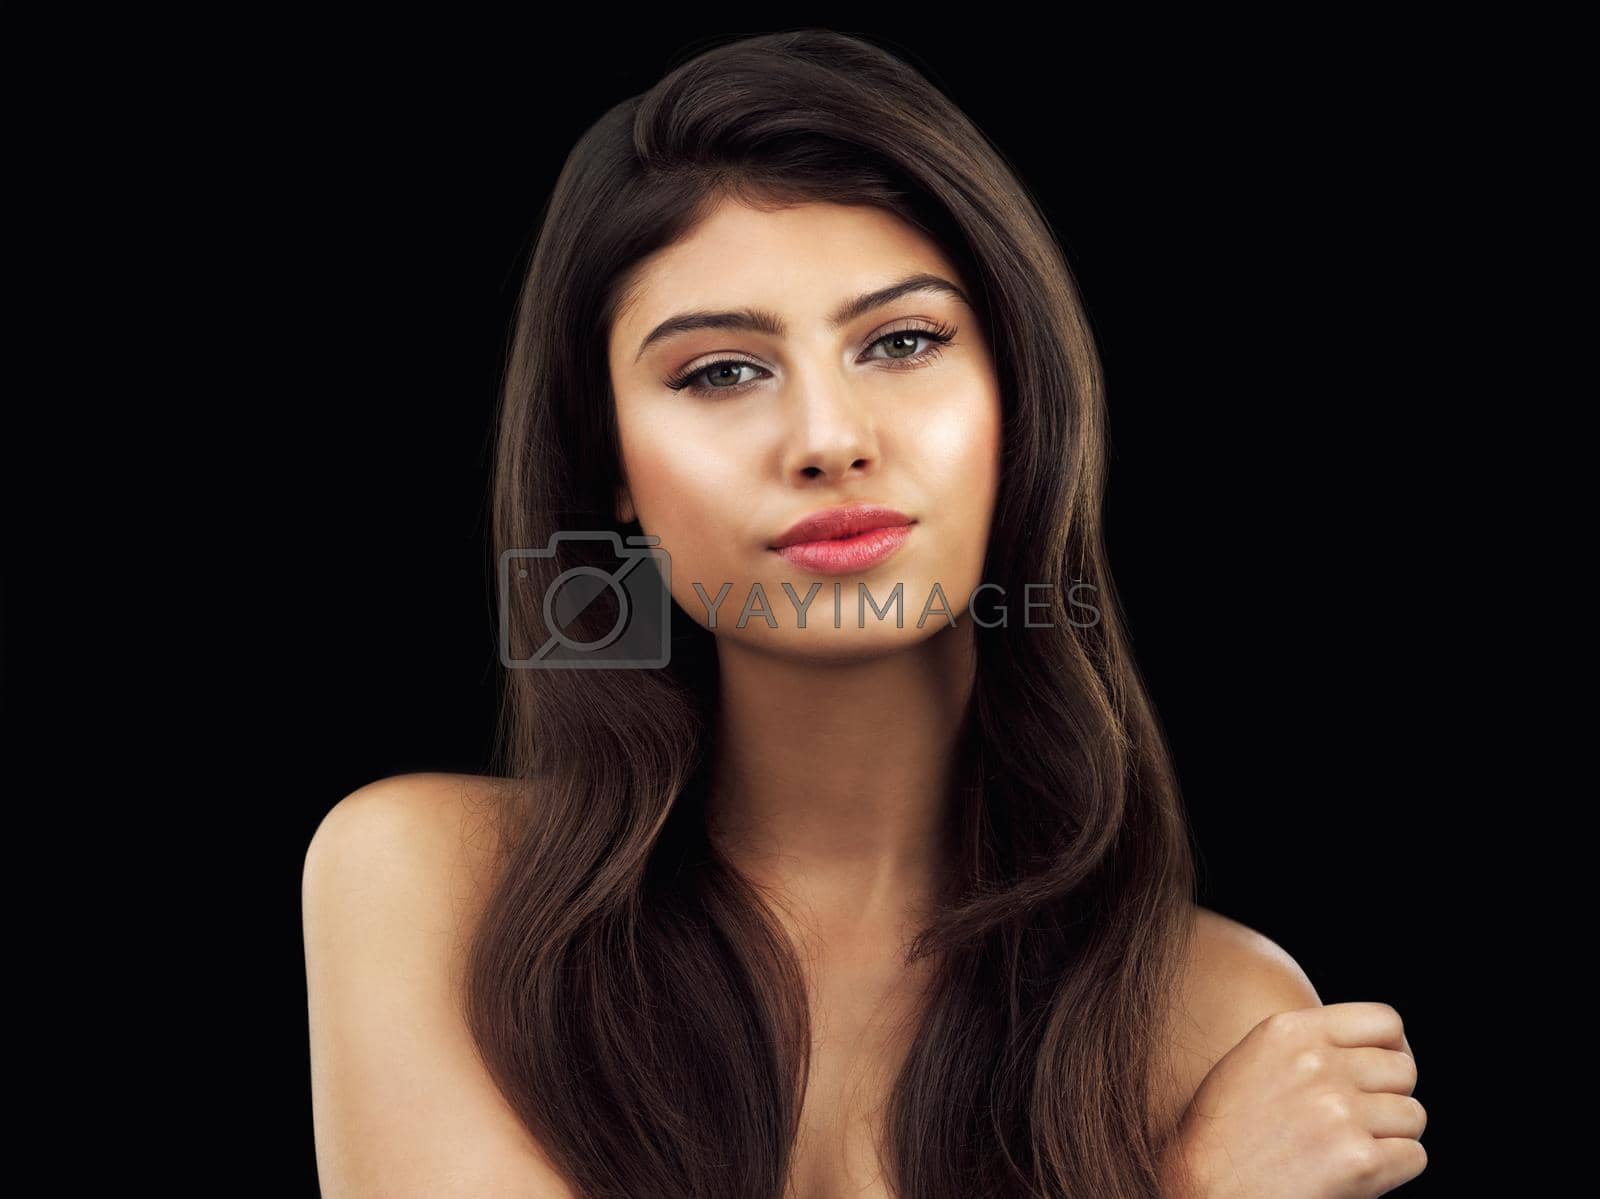 Studio shot of a beautiful woman touching her shoulder posing against a black background.